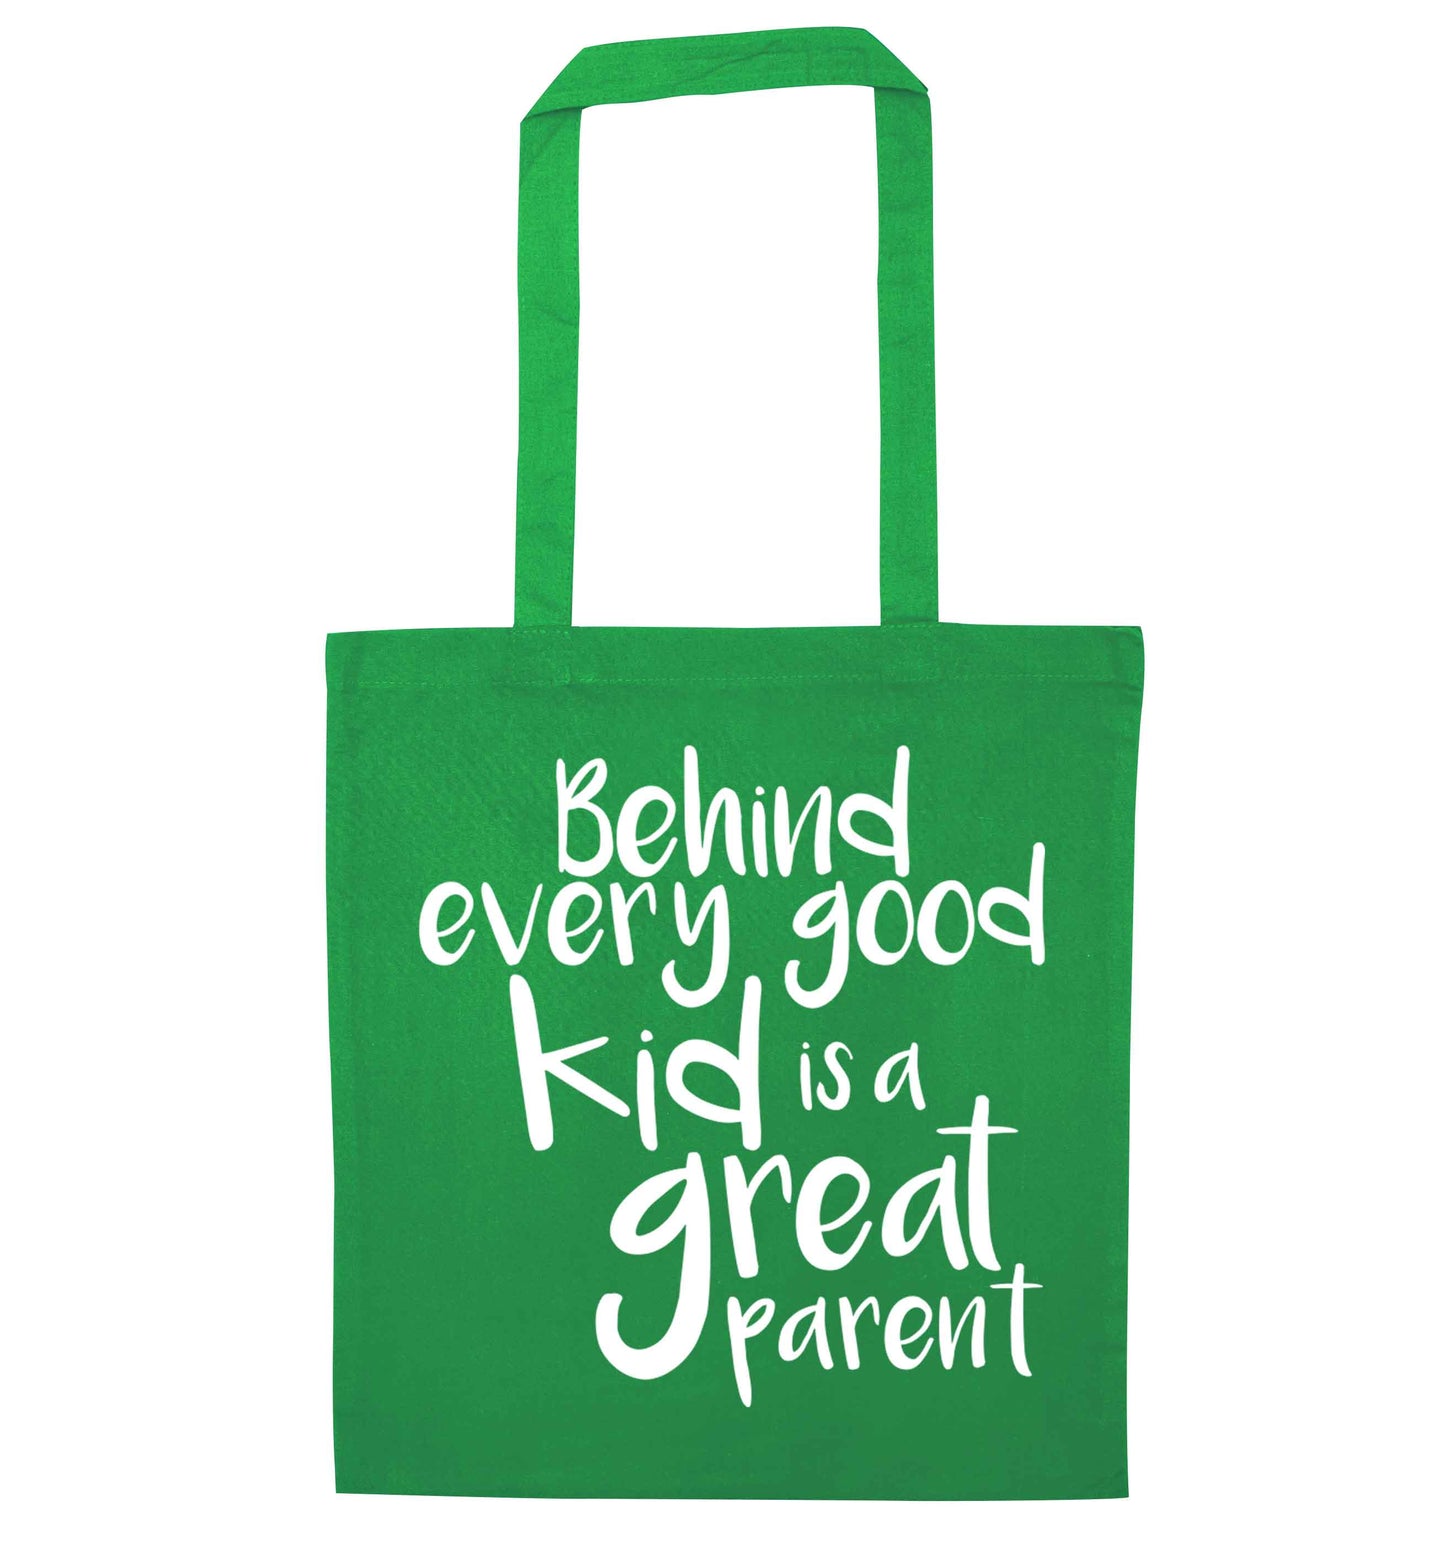 Behind every good kid is a great parent green tote bag